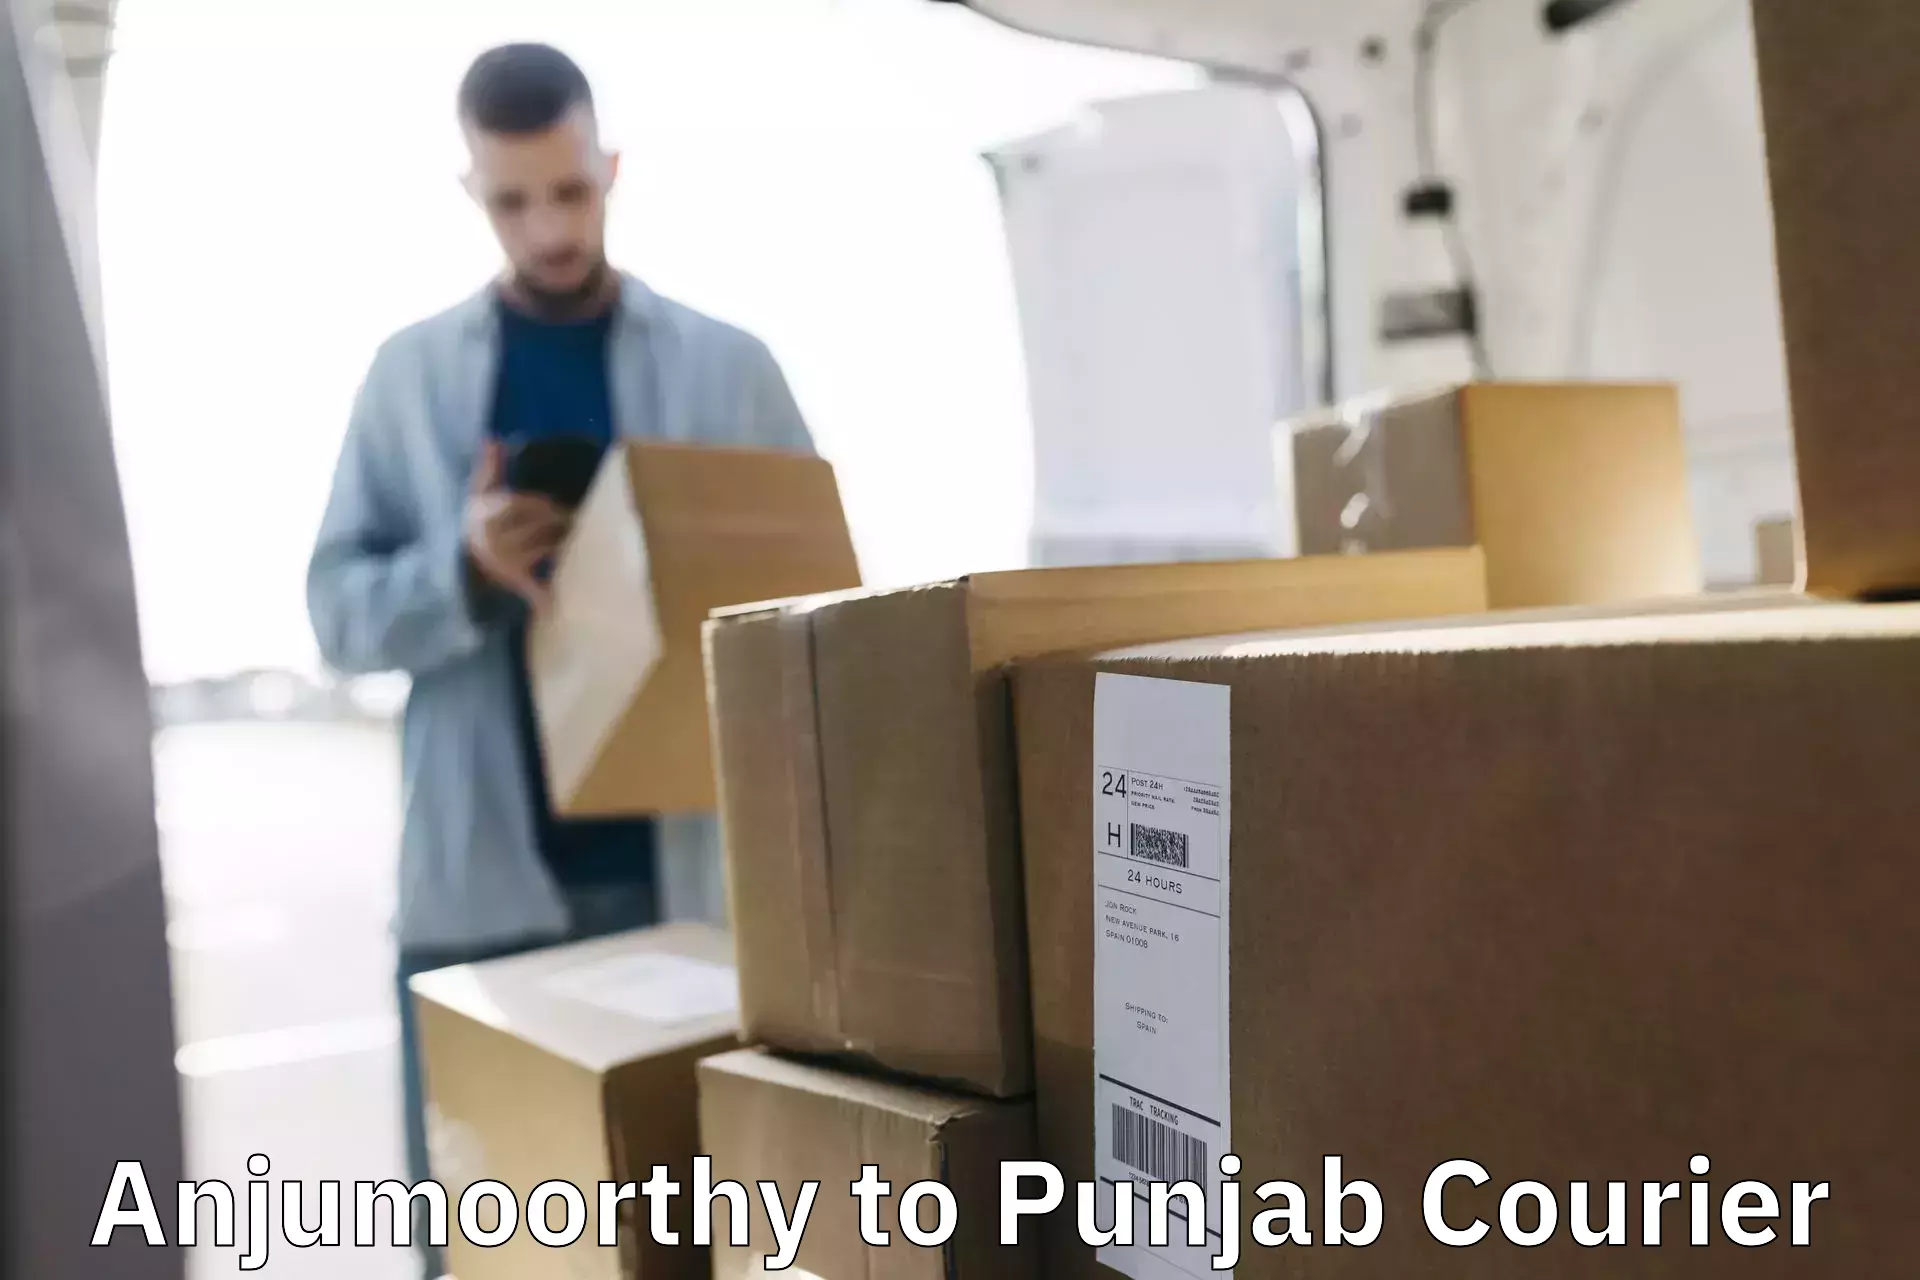 High-quality delivery services Anjumoorthy to Central University of Punjab Bathinda